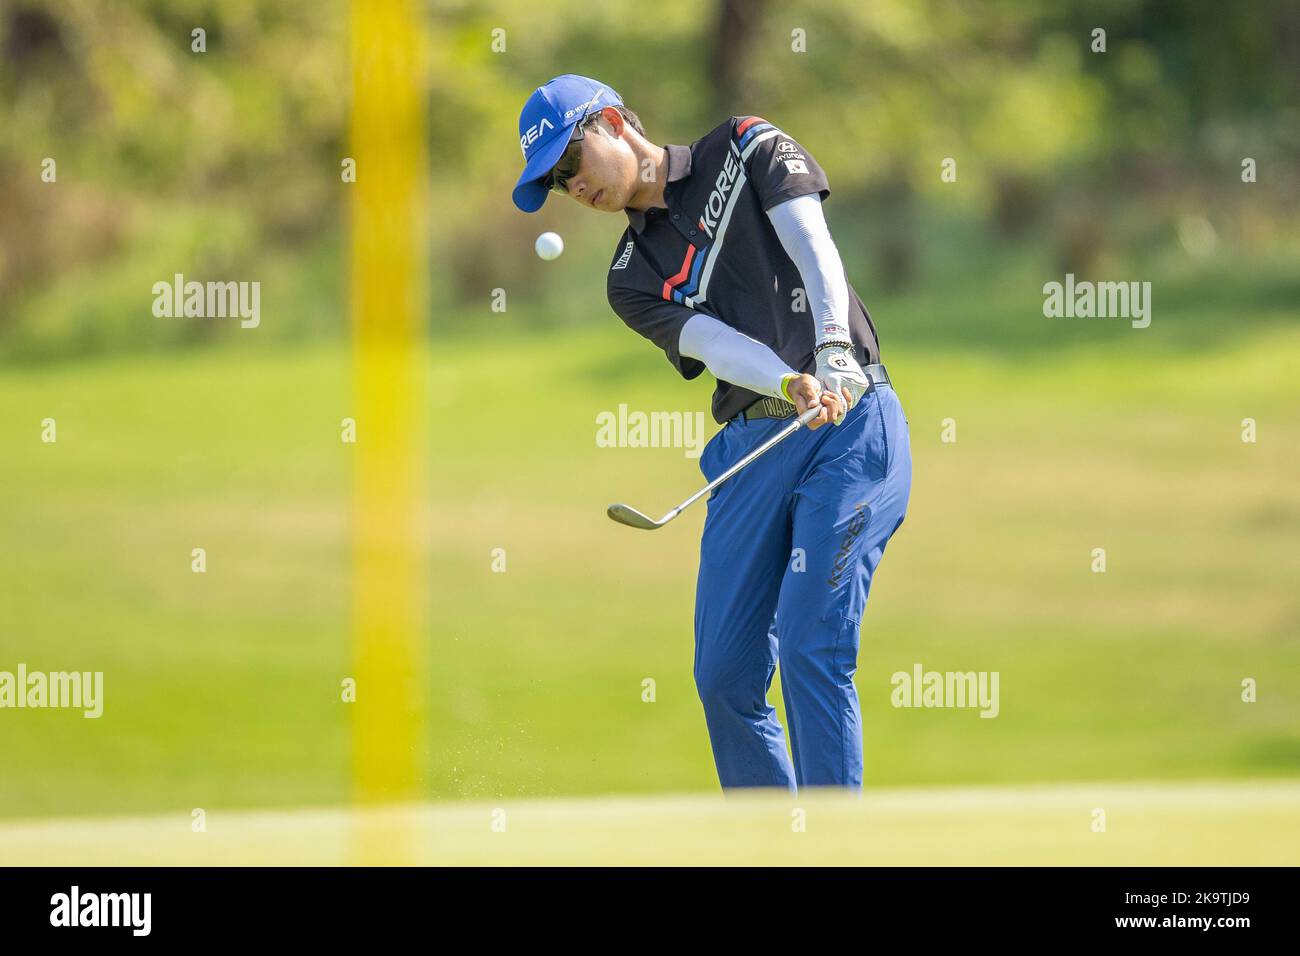 CHONBURI, THAILAND - OCTOBER 30: Minhyuk Song of Korea chips on hole 16 during the final round at the Asia-Pacific Amateur Championship 2022 at Amata Spring Country Club on October 30, 2022 in CHONBURI, THAILAND (Photo by Peter van der Klooster/Alamy Live News) Credit: peter Van der Klooster/Alamy Live News Stock Photo